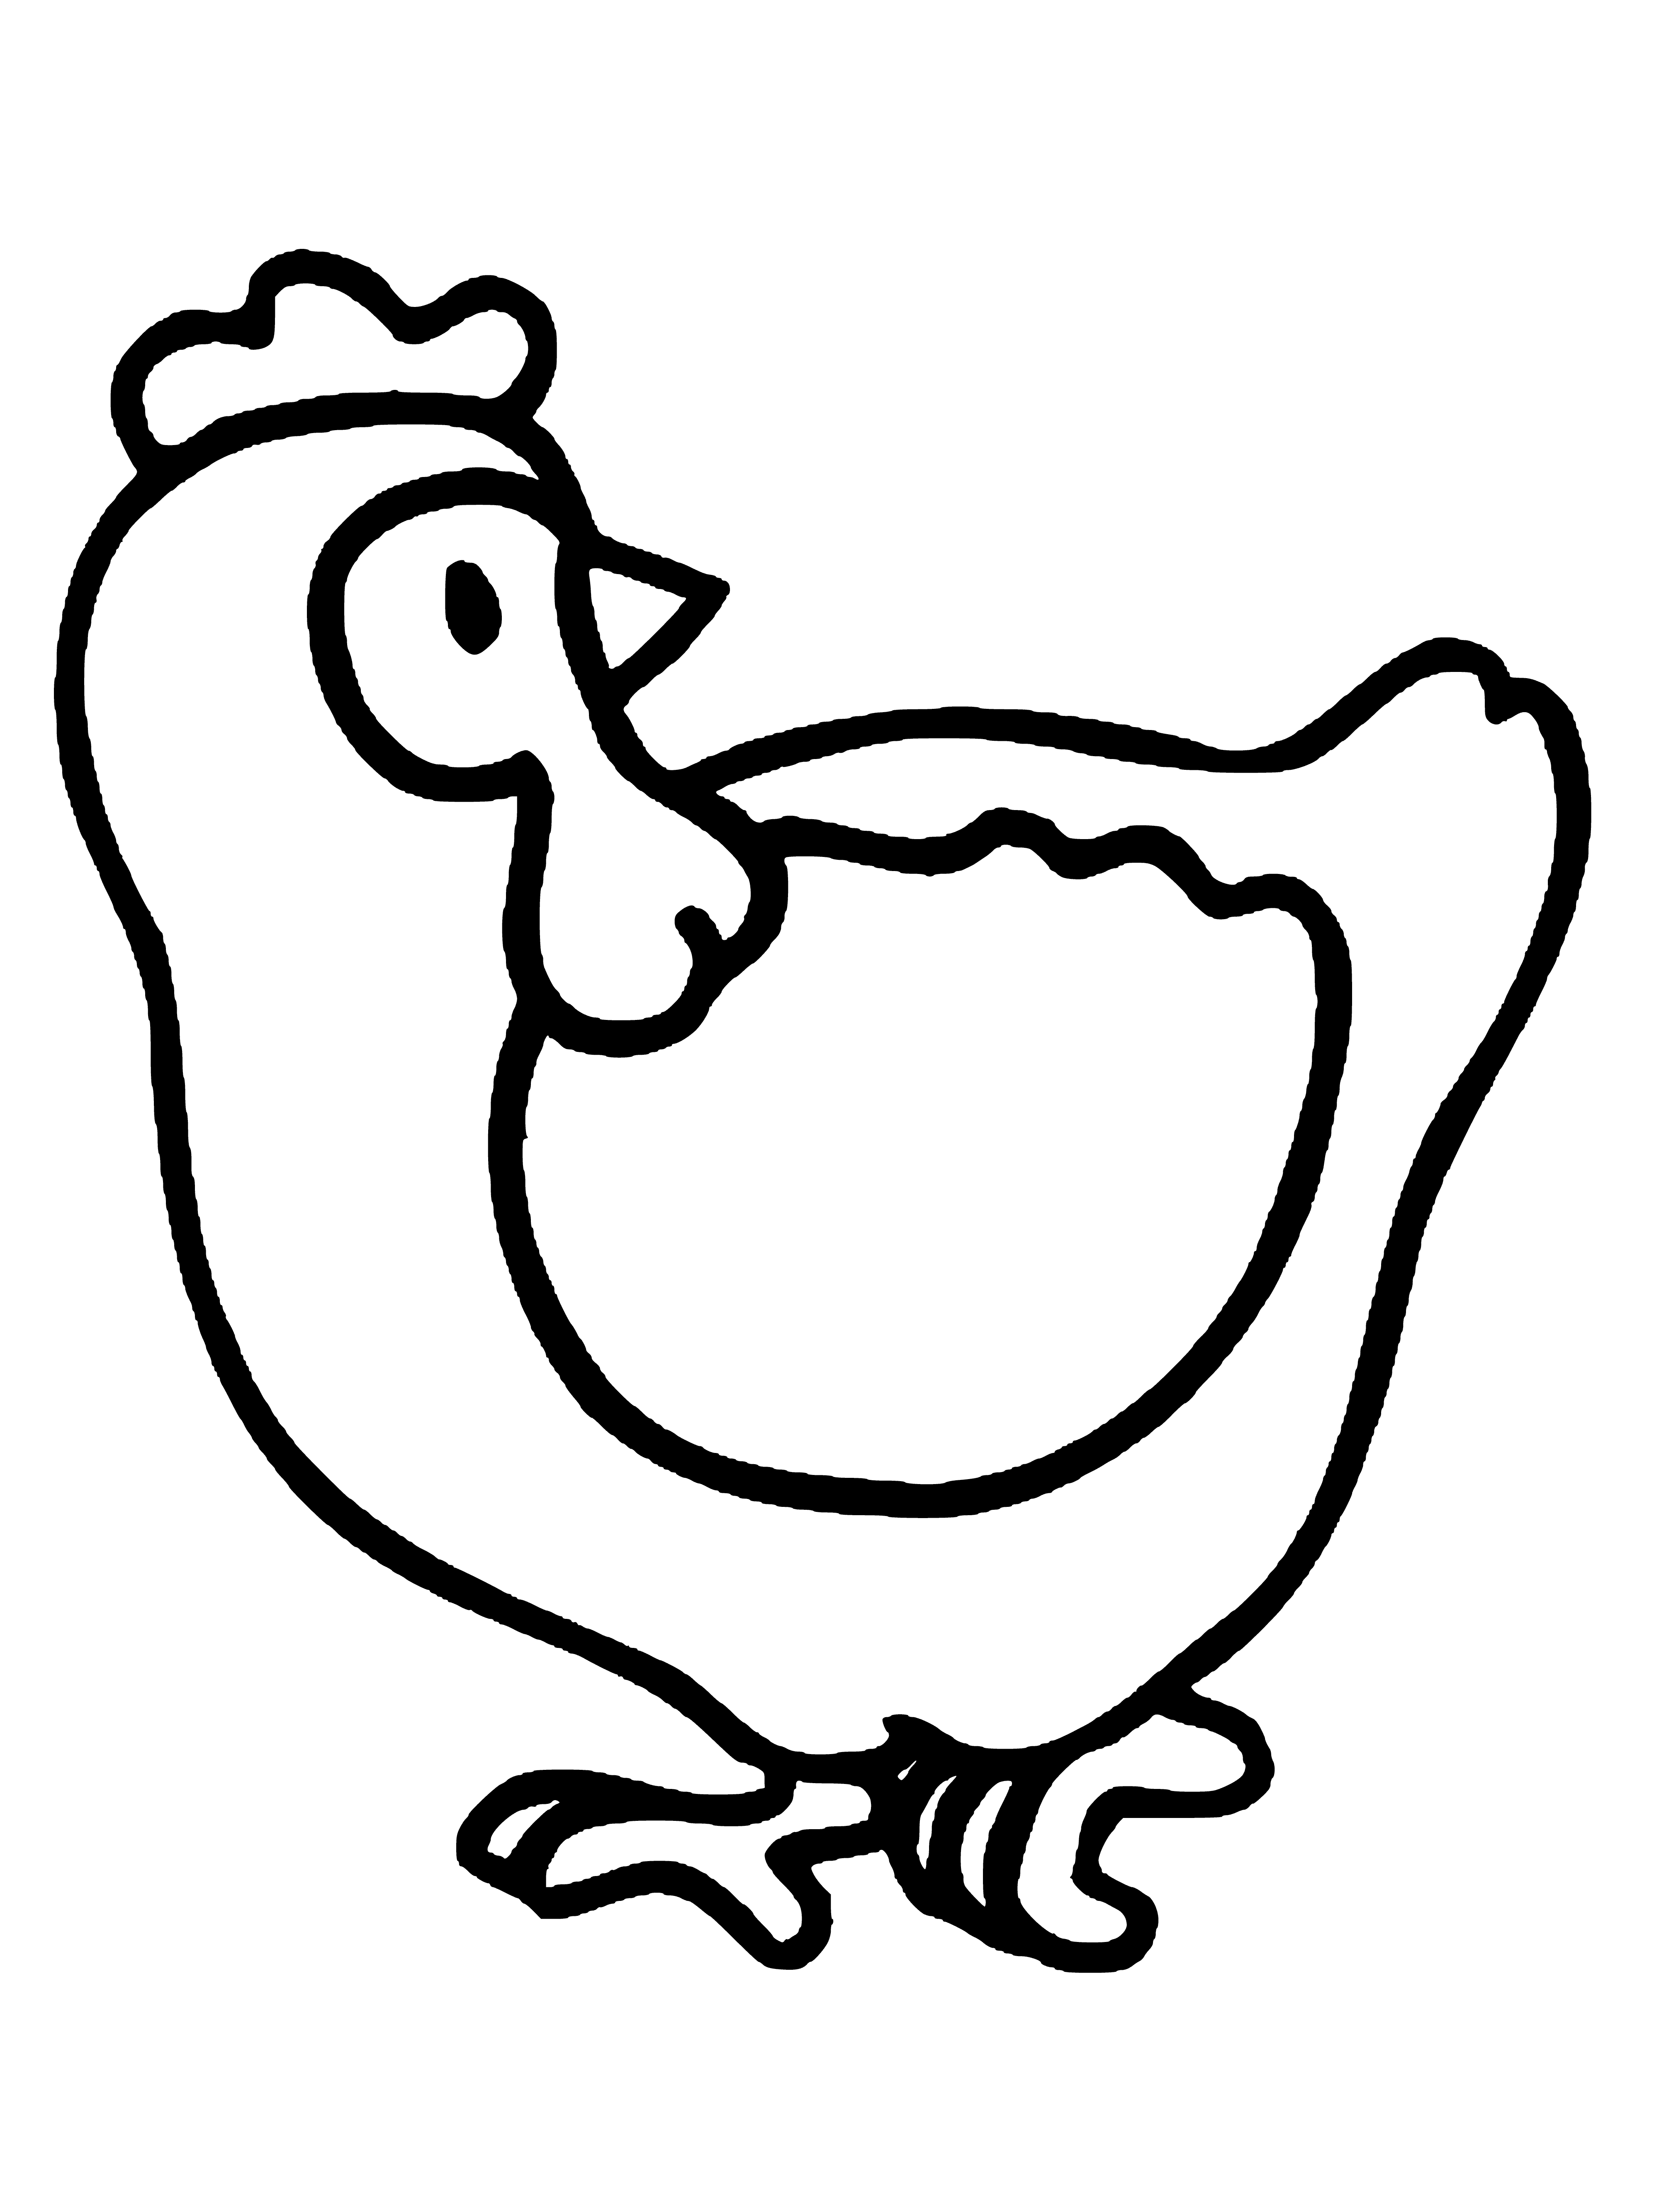 coloring page: A hen with two large eggs, one green and one yellow, surrounded by ovals in green, yellow and orange. "Coloring pages for children 3 years old - Hen." #PreschoolActivities